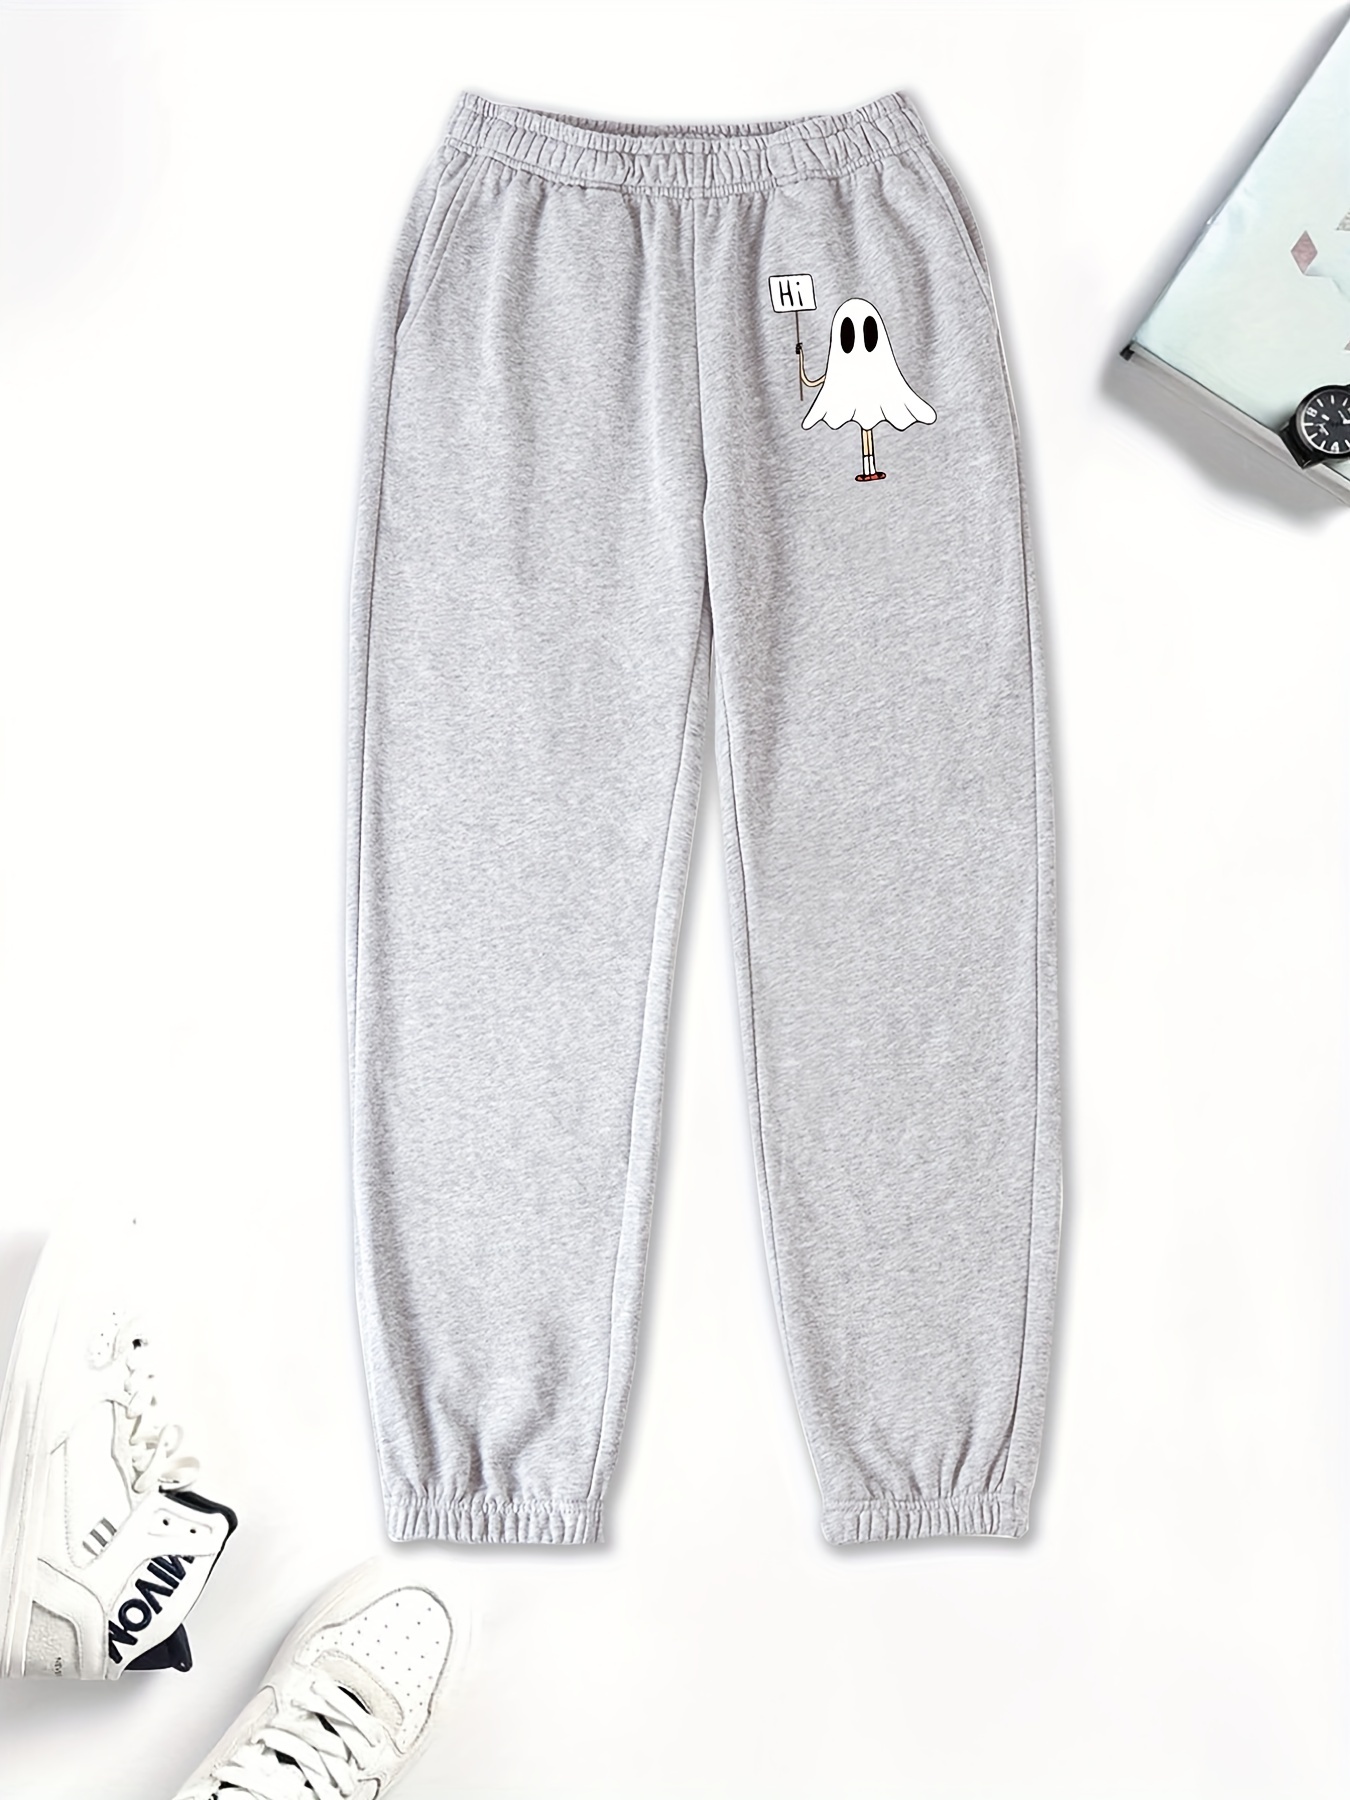  HCNTES Sweat Pants for Women Light Pink Sweatpants Halloween  Sweatpants for Women High Waisted Ghost Graphic Print Cute Joggers Teen  Girls Drawstring Lounge Bottoms : Clothing, Shoes & Jewelry